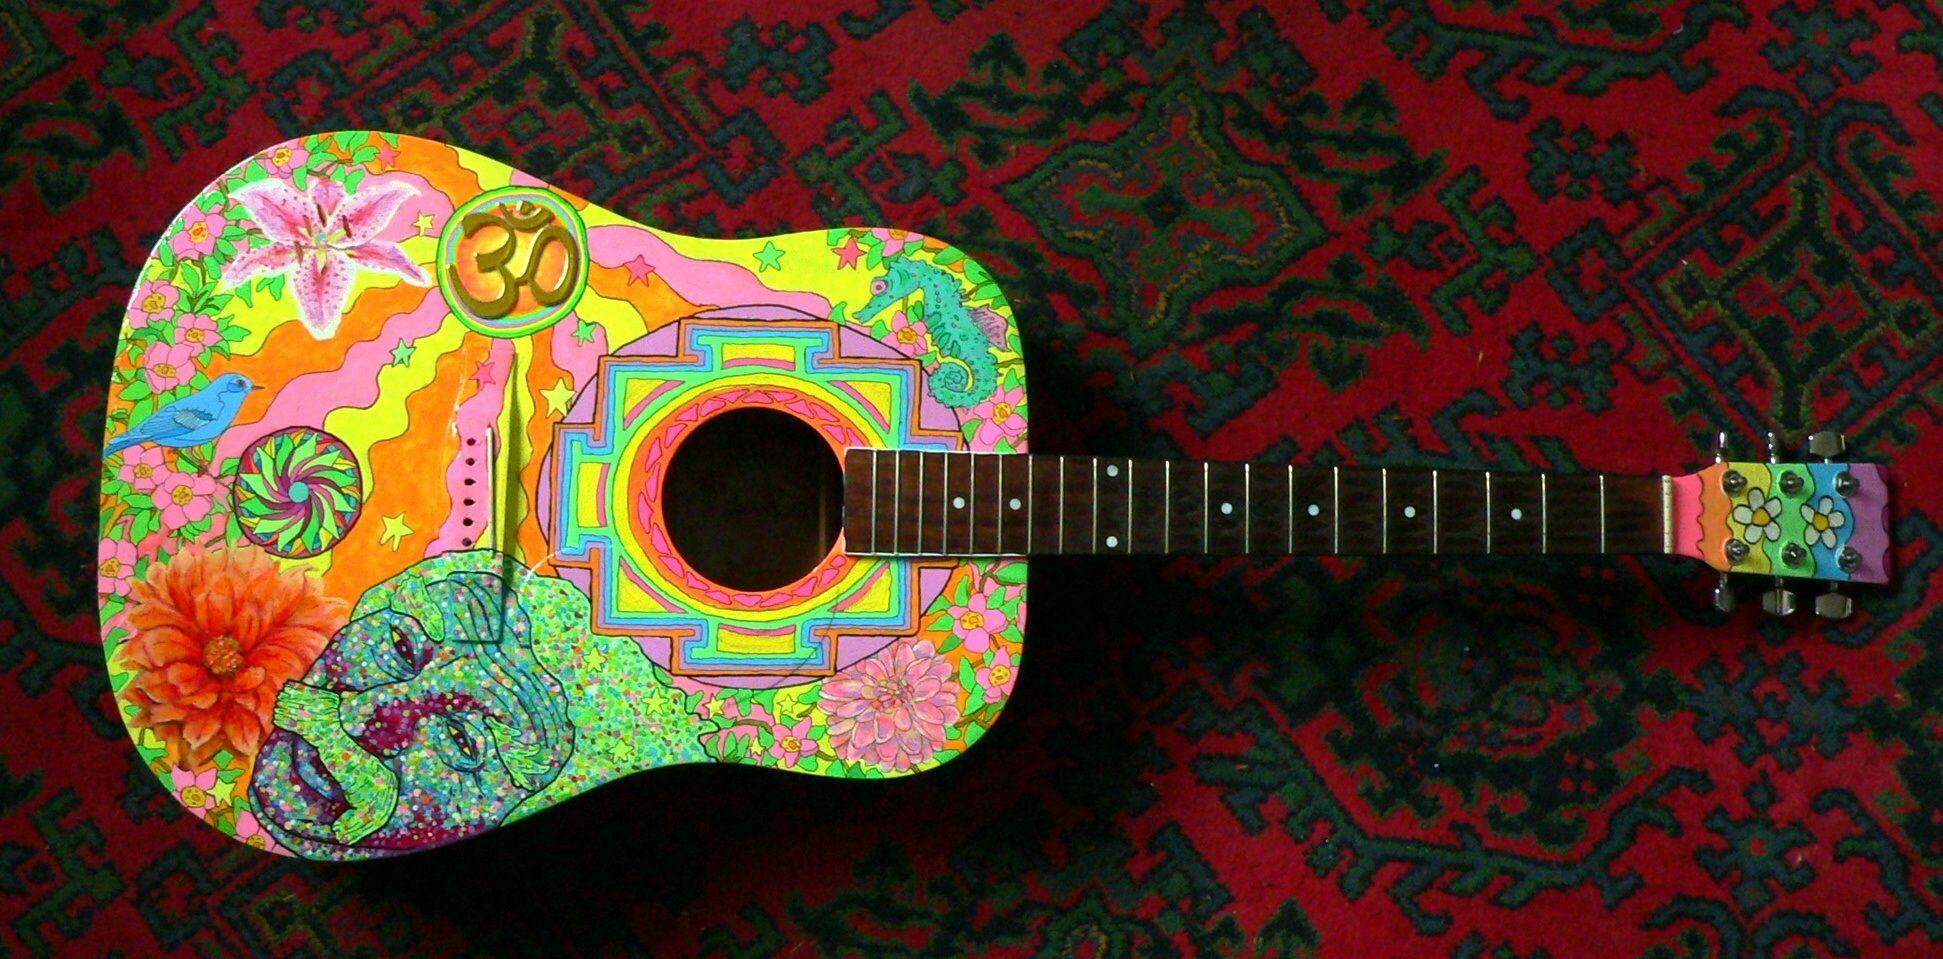 Free Image, rock, music, play, acoustic guitar, pattern